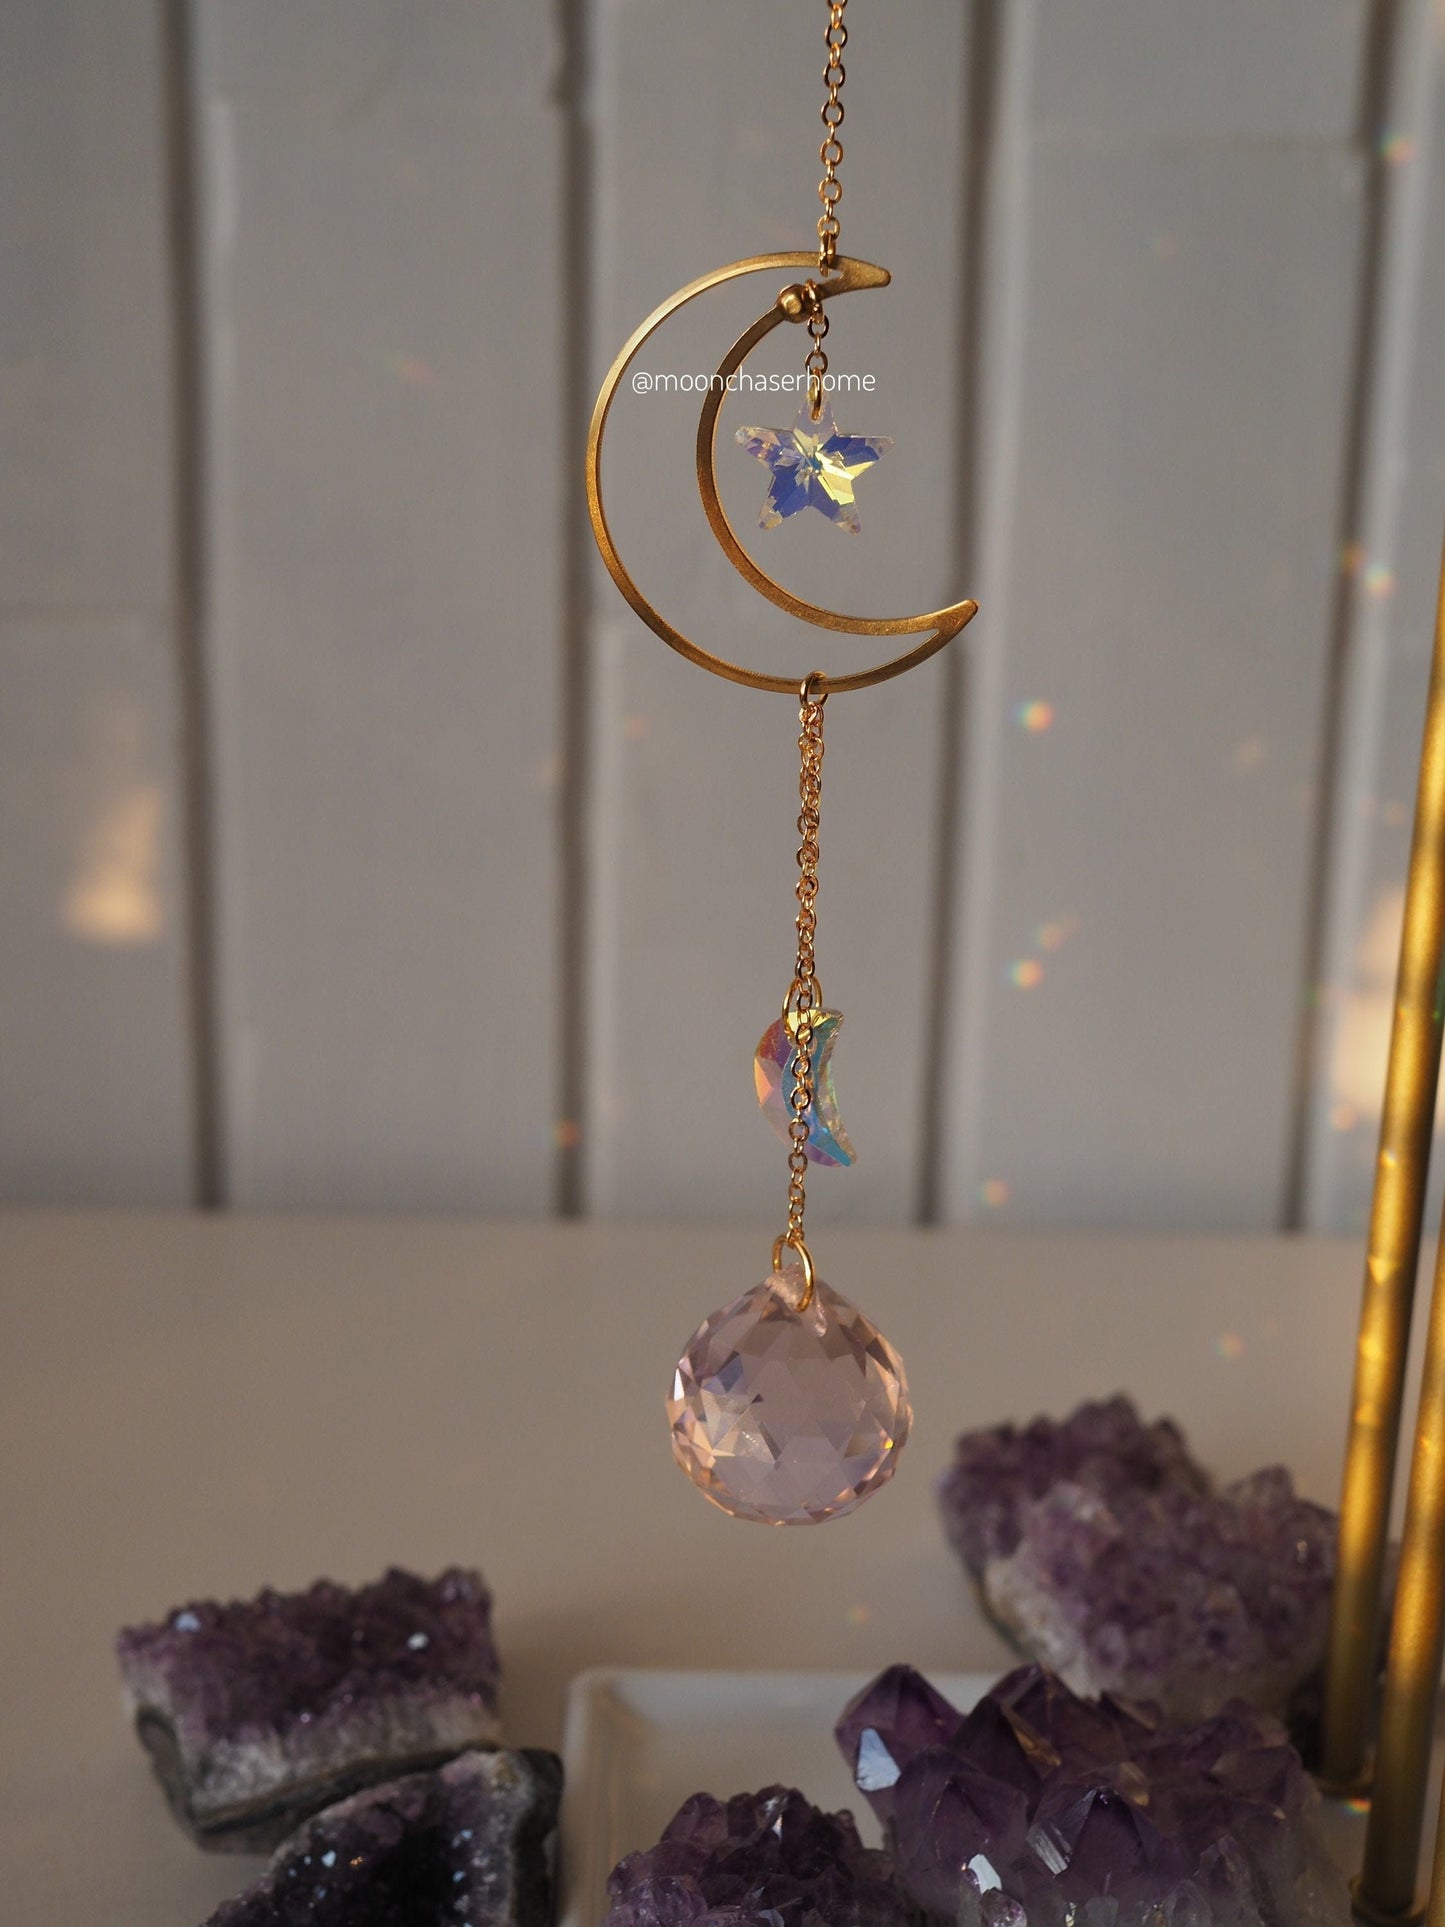 Imani moon suncatcher with big glass prism, crystal car charm, rainbow prism, light diffuser, gift idea for woman, birthday gift, witchy